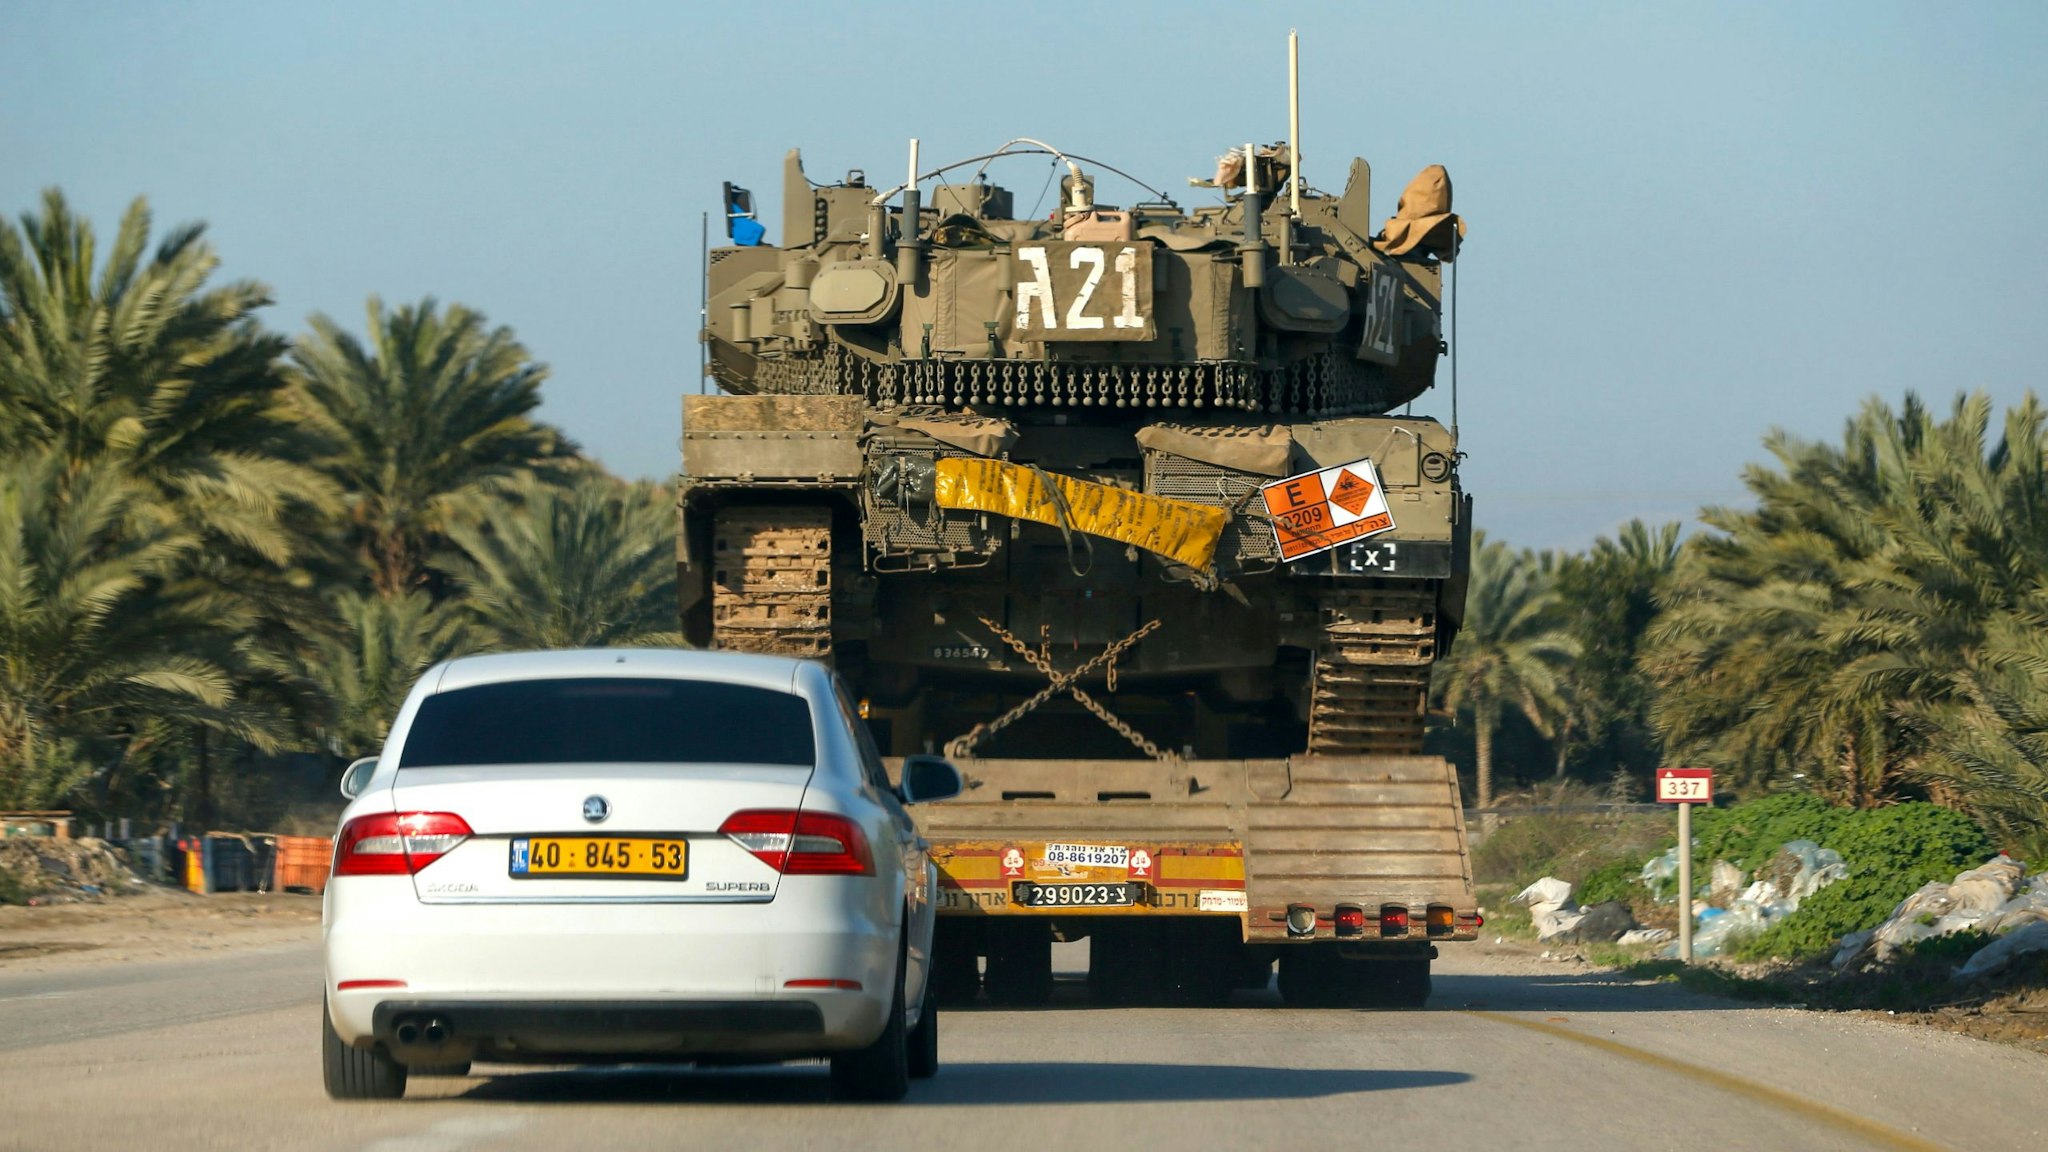 A general view taken on March 3, 2020, shows an Israeli Merkava IV battle tank being transported past an agricultural field near the settlement of Mehola in the Jordan valley in the occupied West Bank.